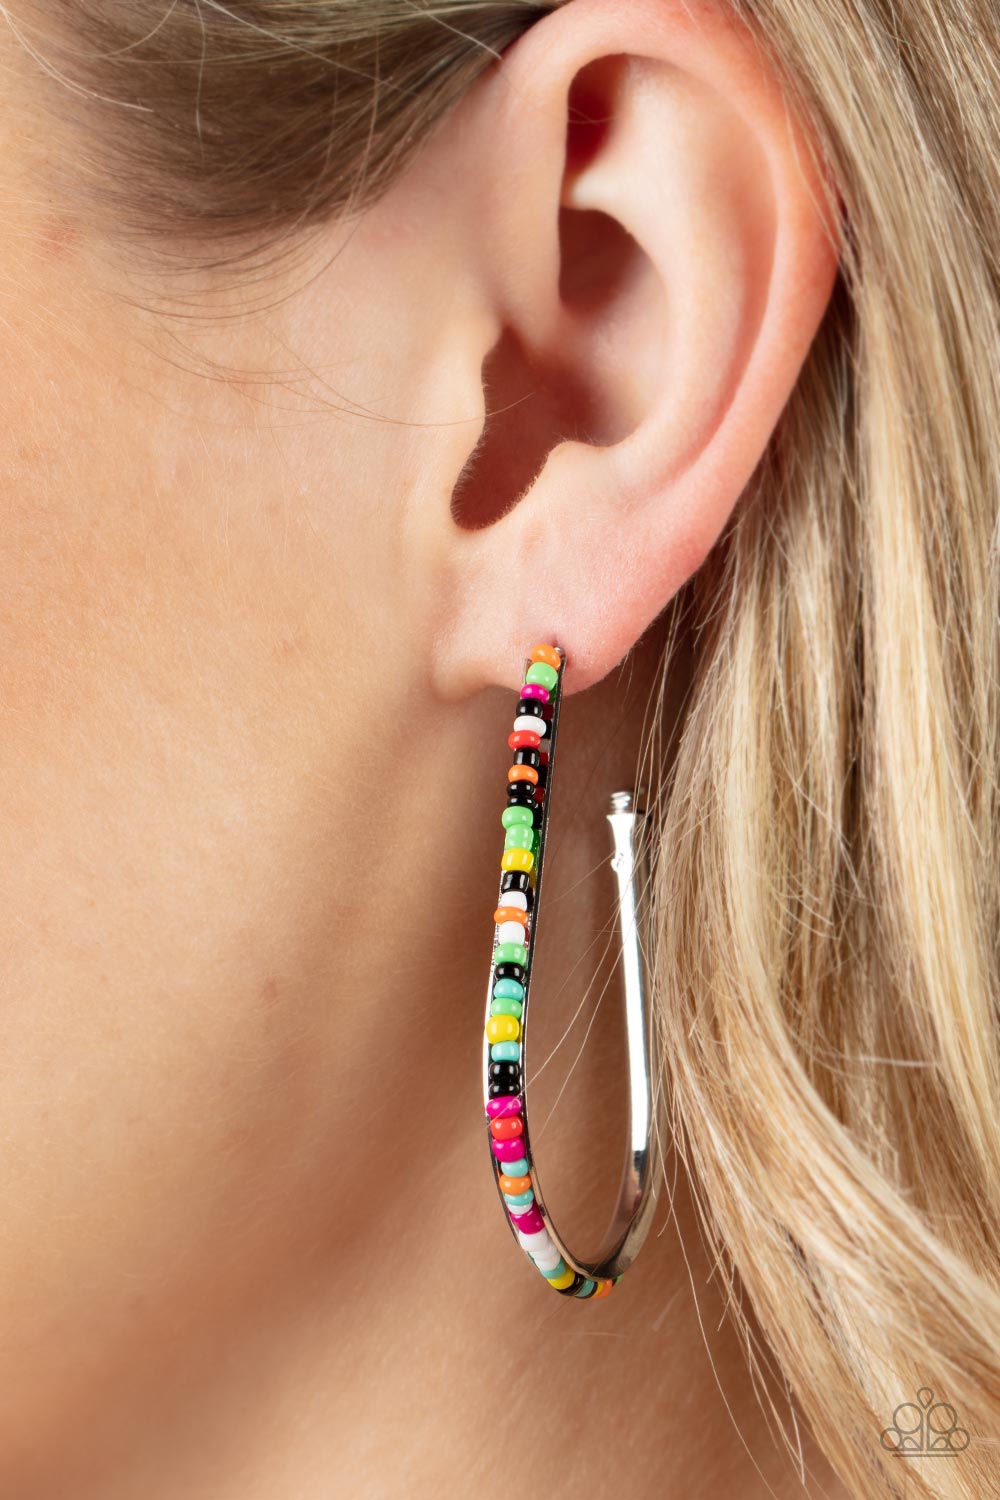 Beaded Bauble Multi Seed Bead Hoop Earrings - Paparazzi Accessories-on model - CarasShop.com - $5 Jewelry by Cara Jewels